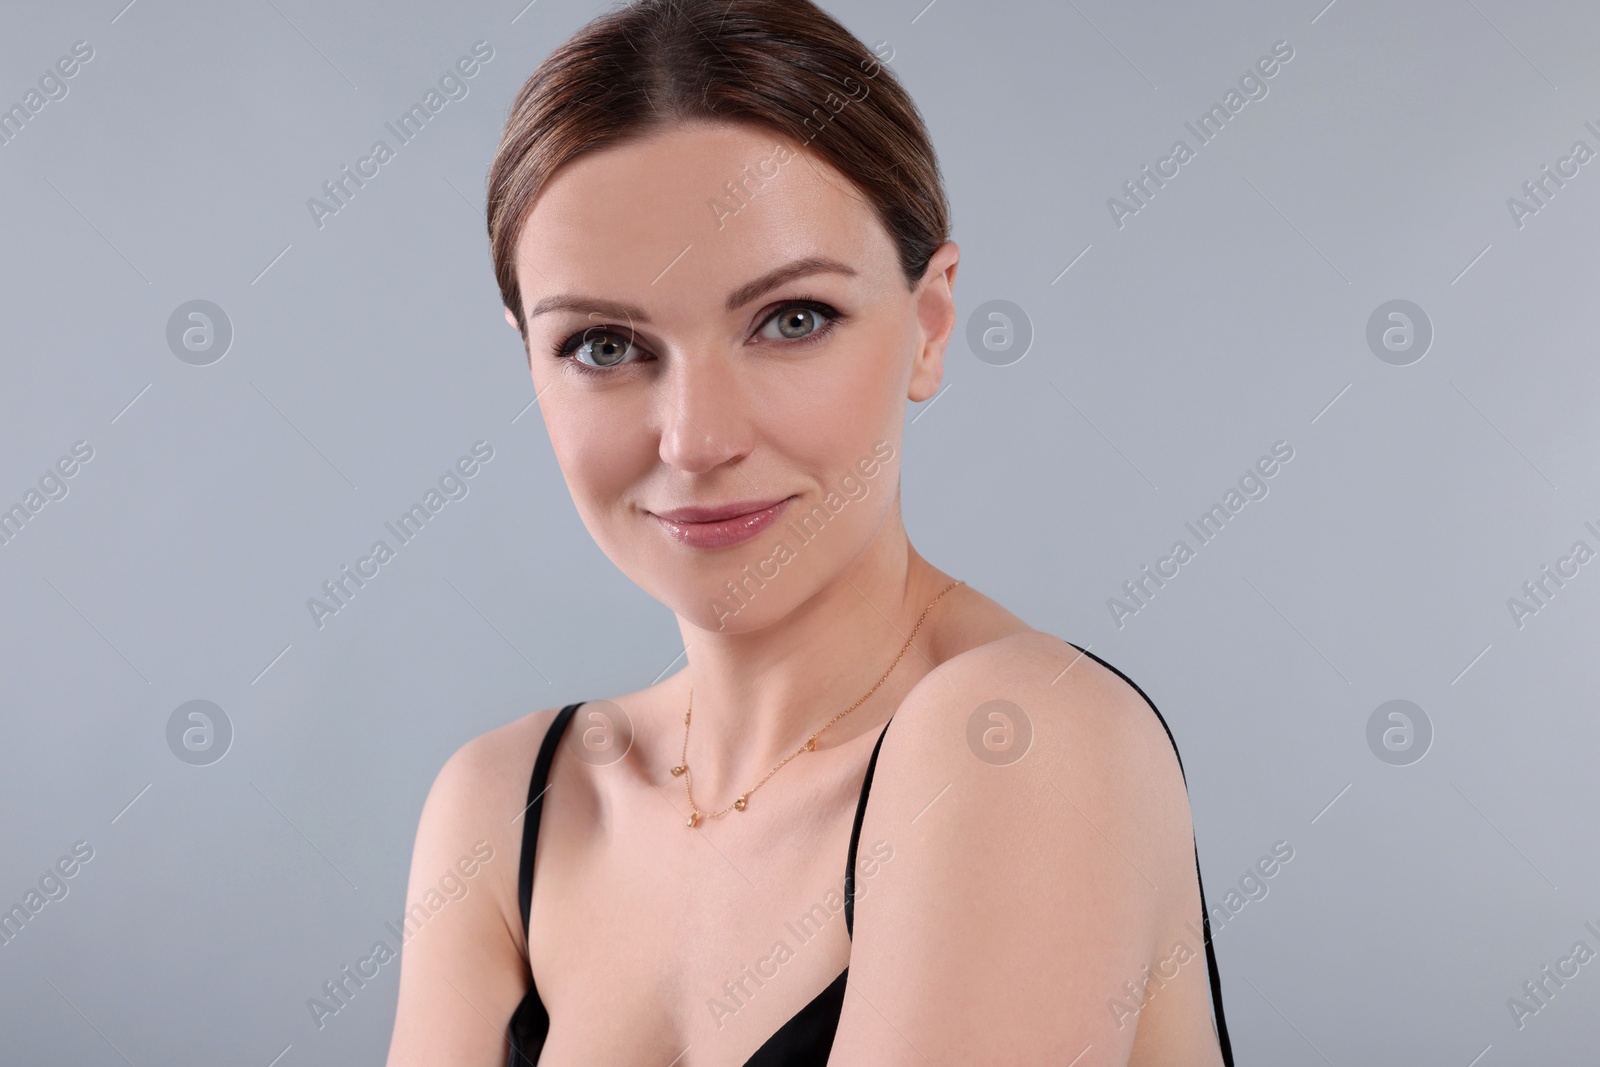 Photo of Beautiful woman with elegant necklace on light grey background